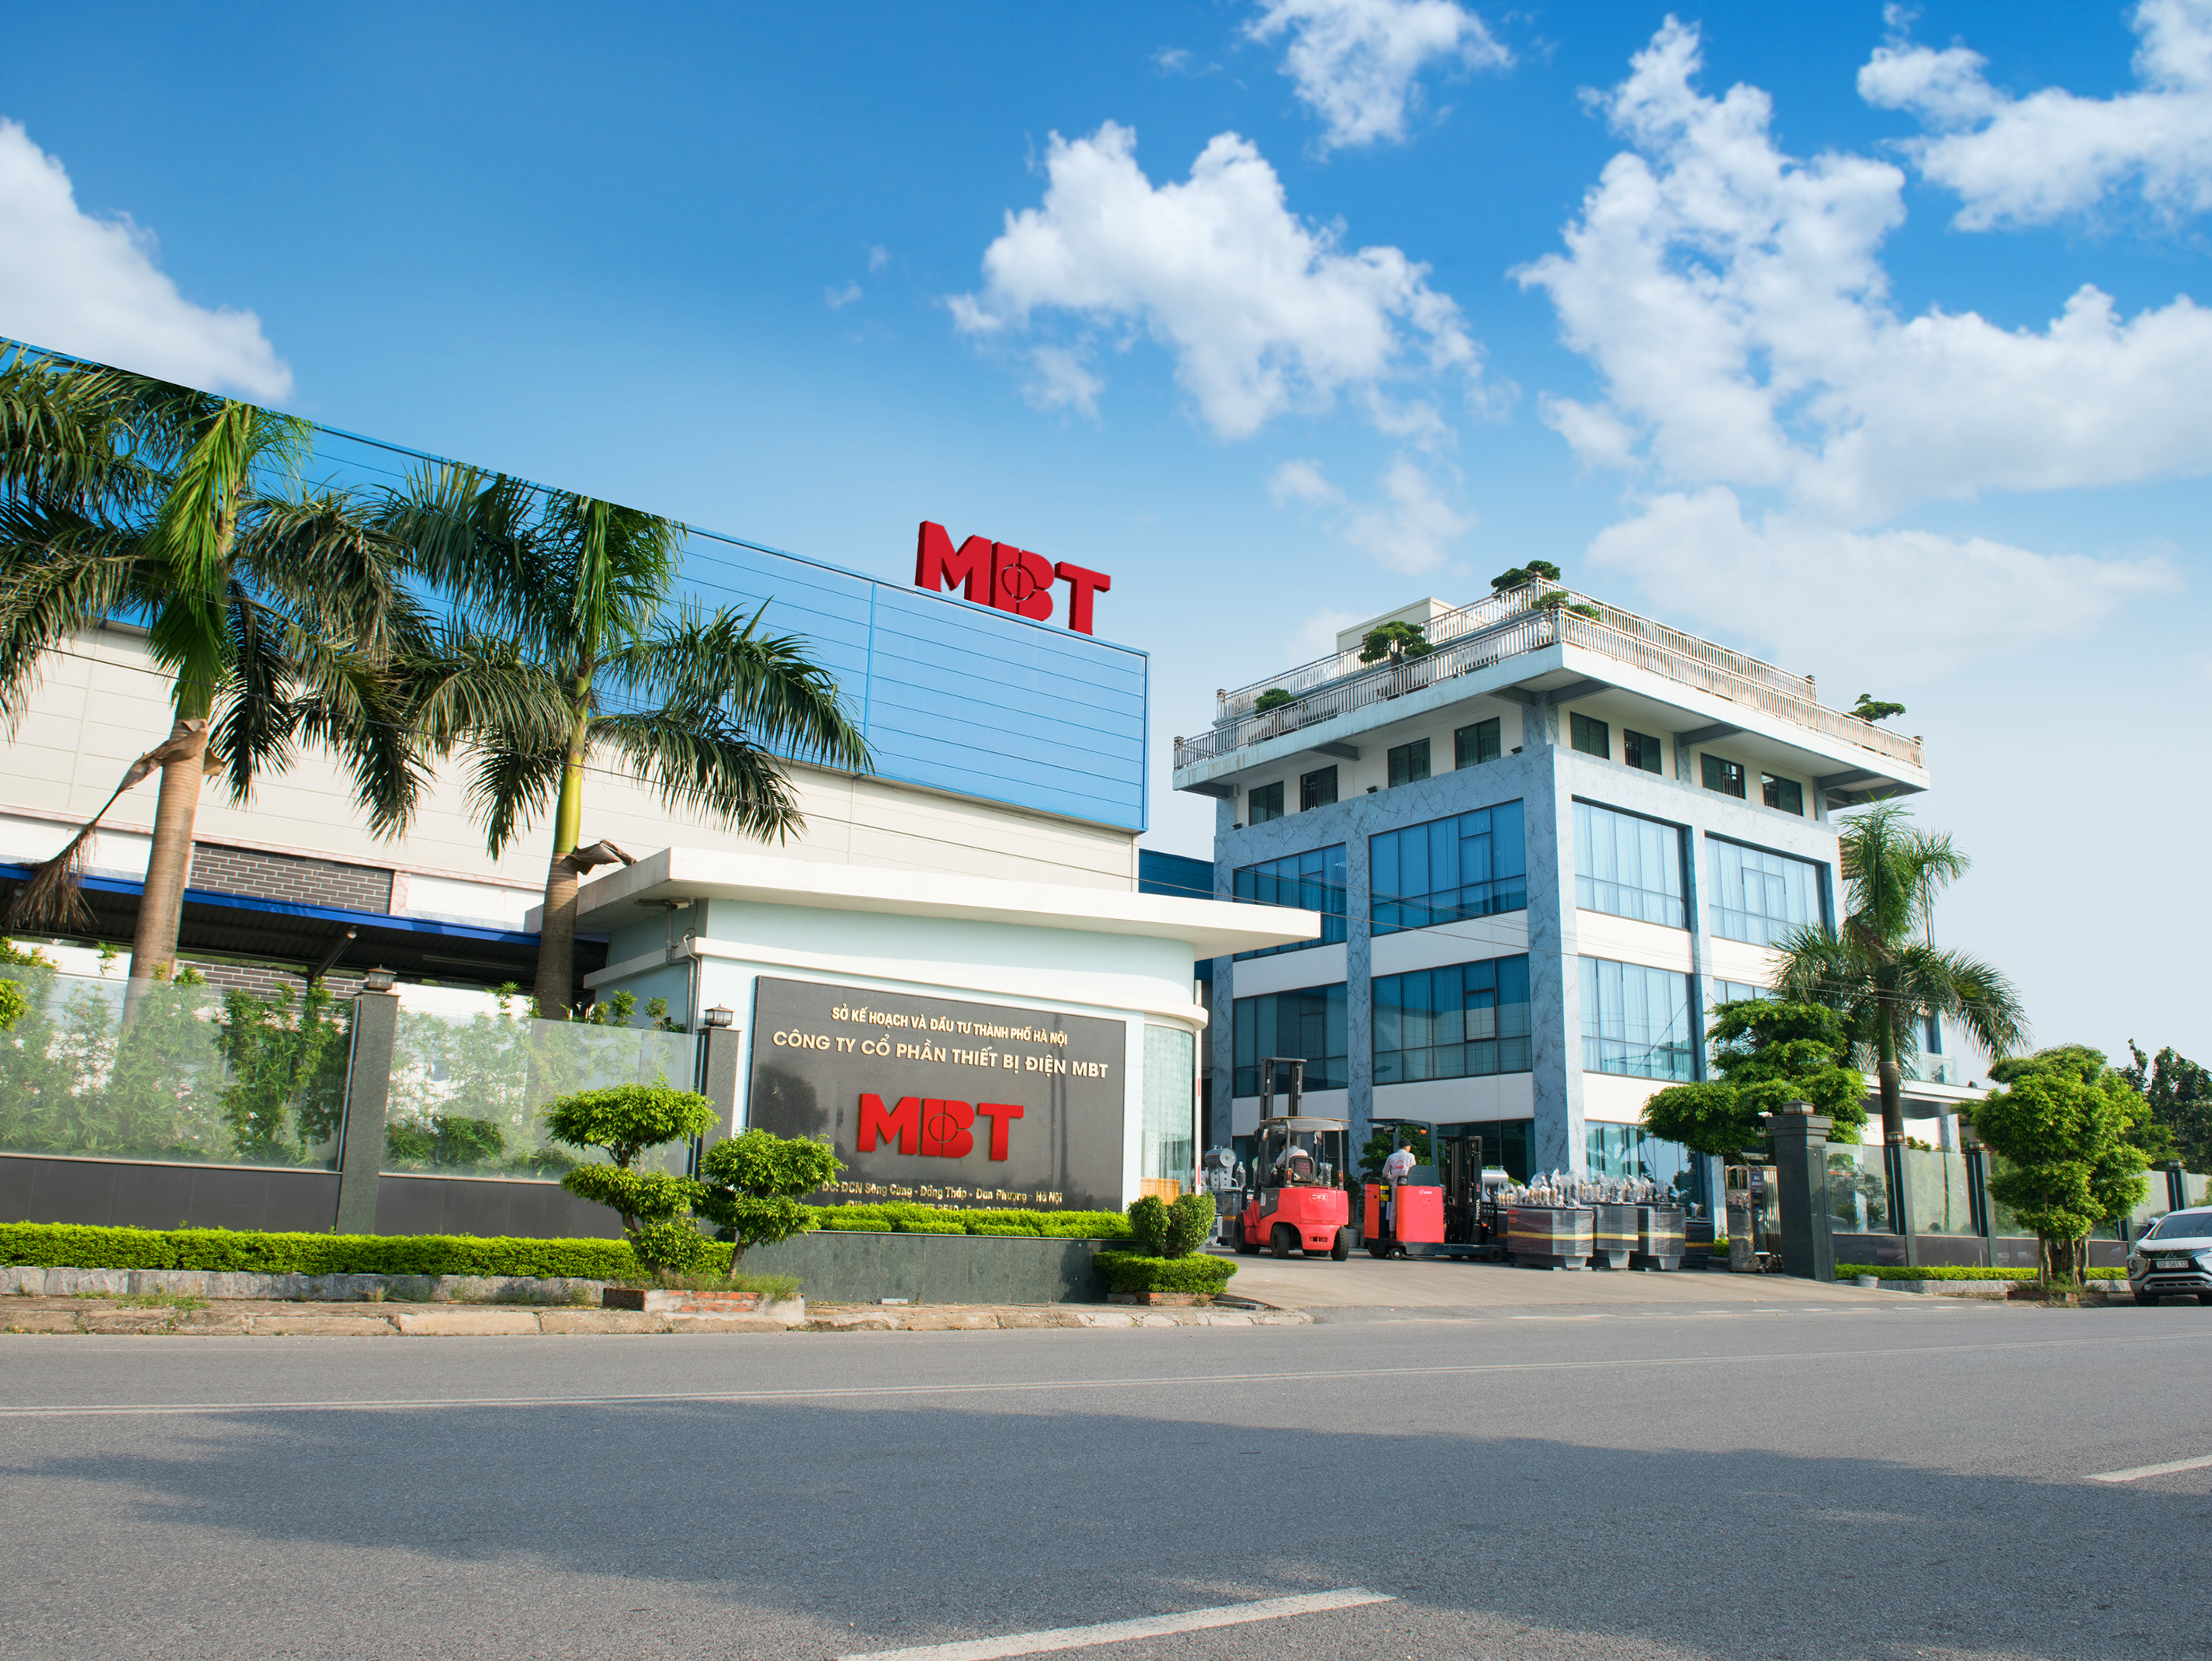 MBT aims to become the leading distribution transformer manufacturer in Vietnam